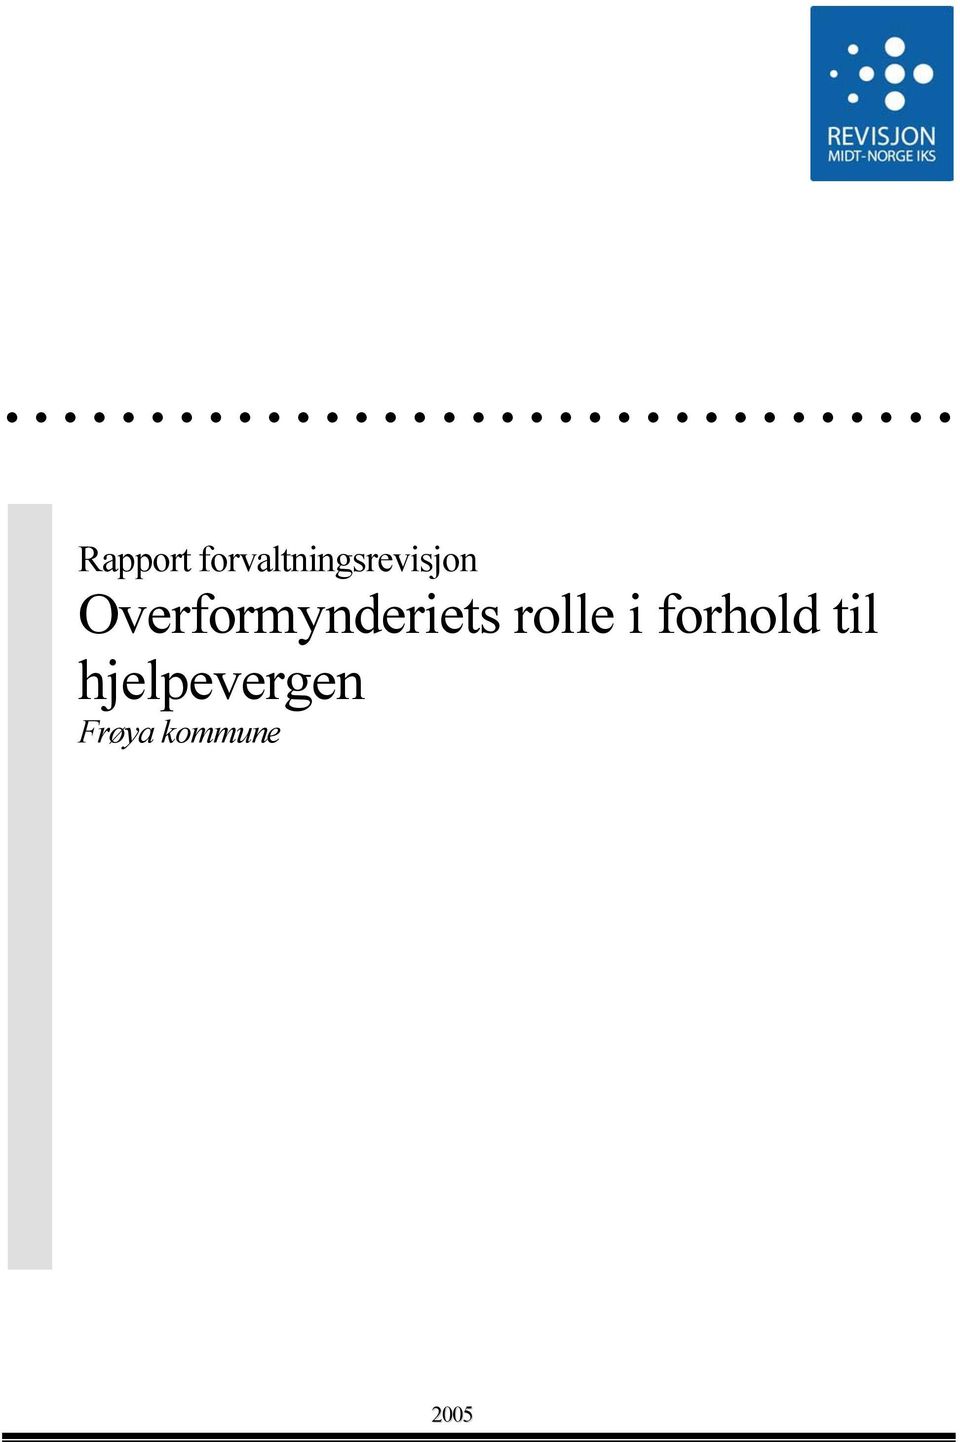 Overformynderiets rolle